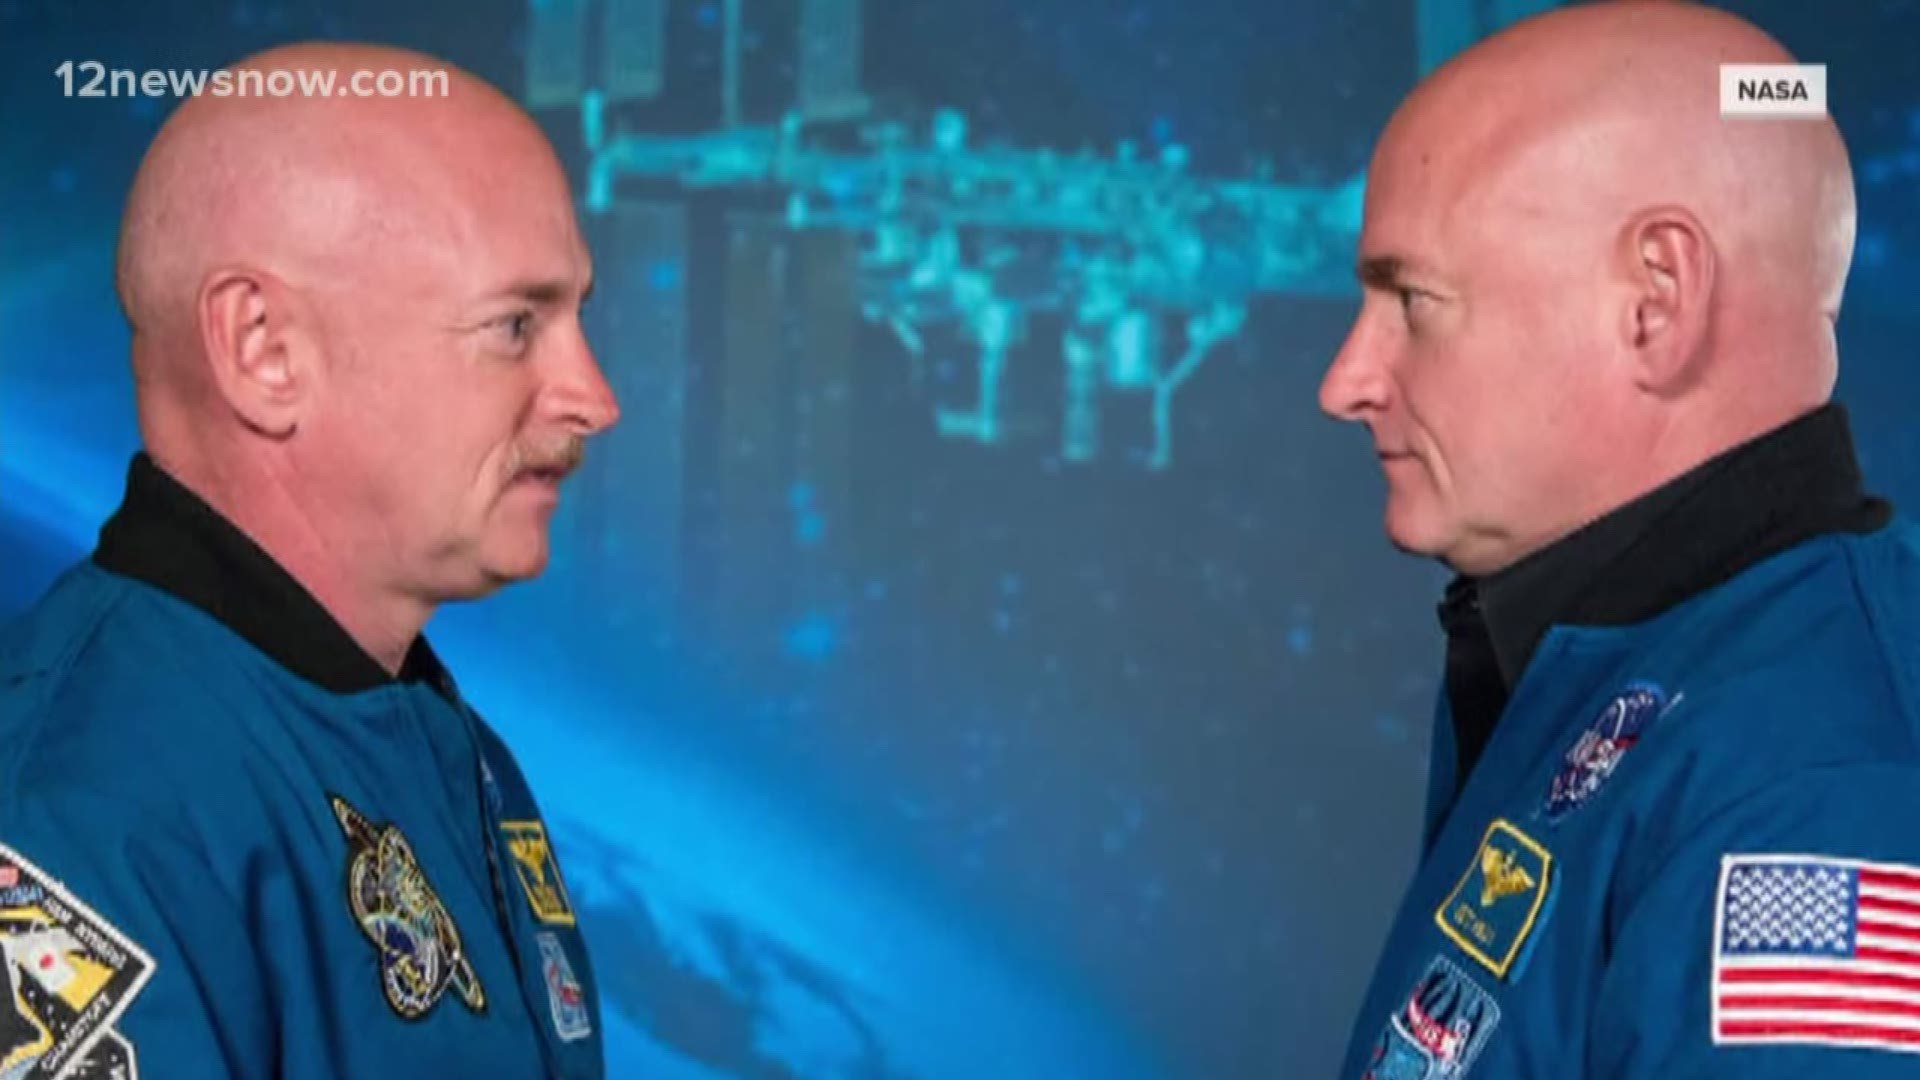 Astronaut Scott Kelly spent more than 340 days in space while his twin Mark stayed on earth.